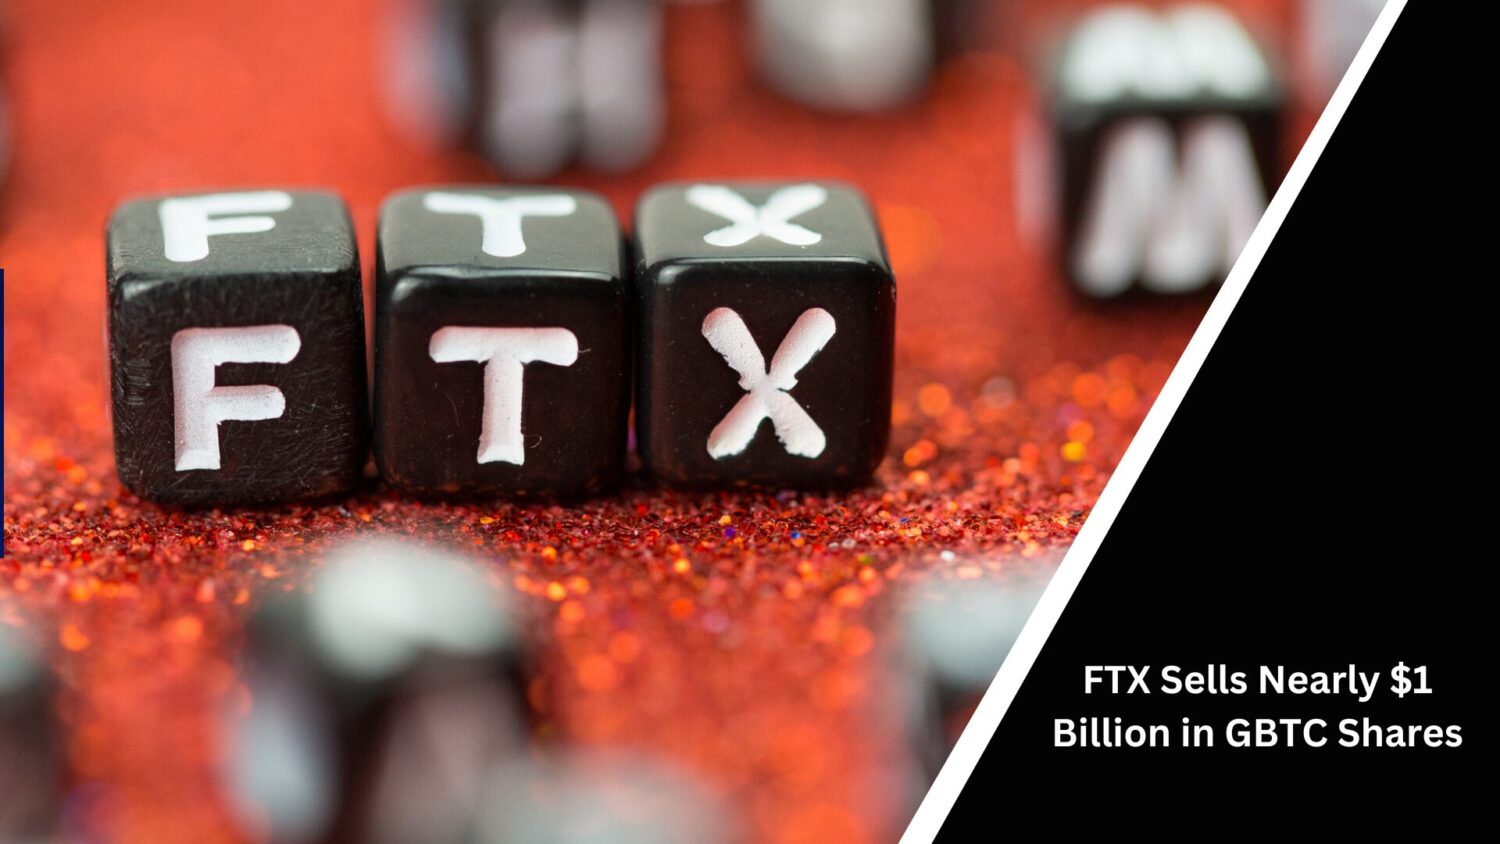 Ftx Sells Nearly $1 Billion In Gbtc Shares